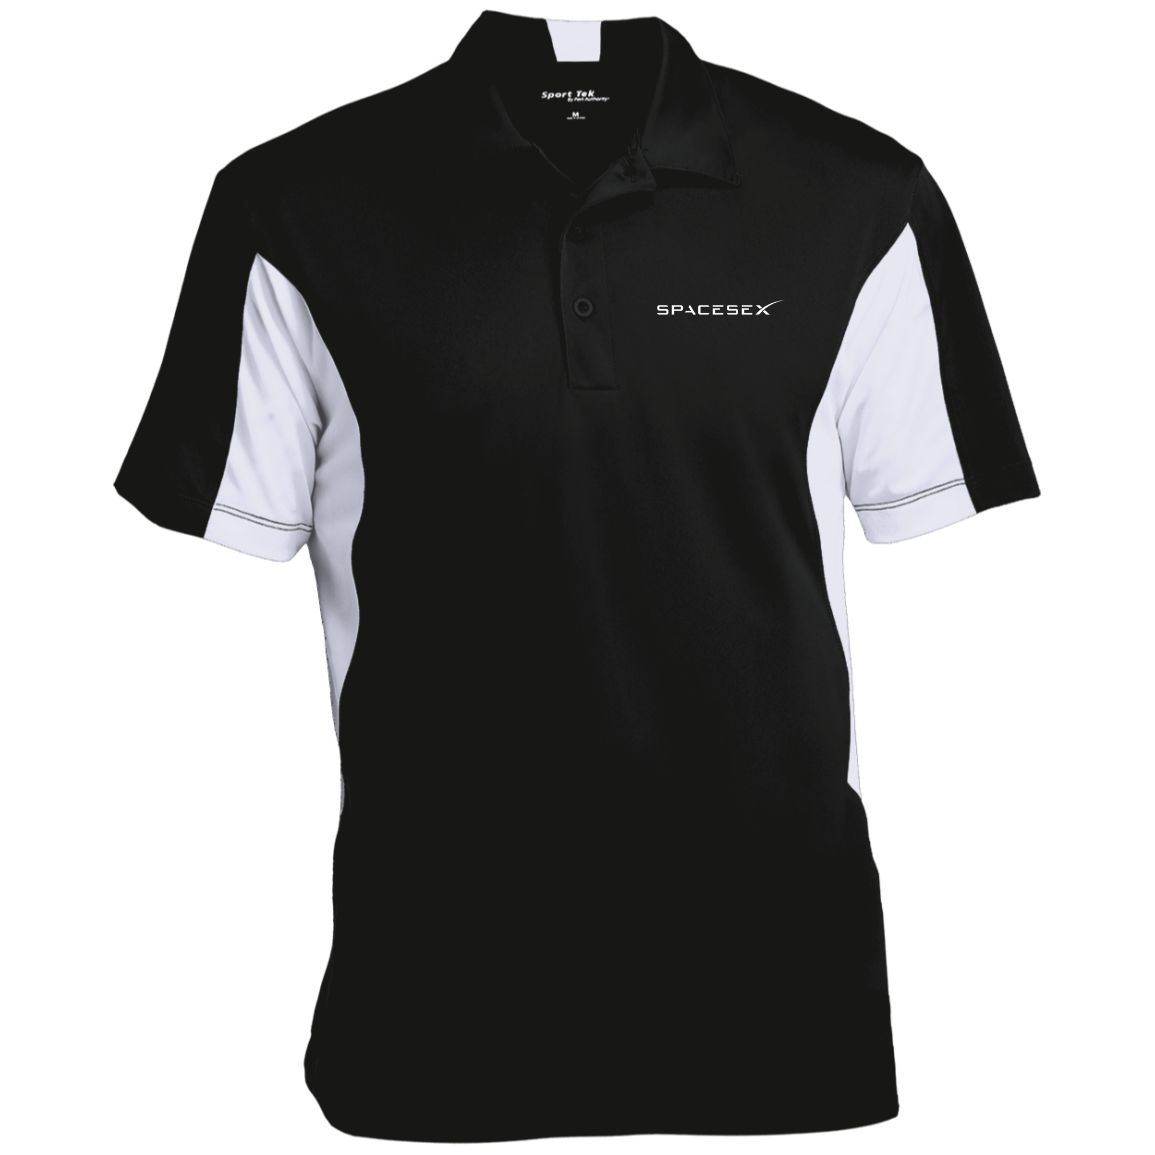 "SpaceseX" Men's Performance Polo